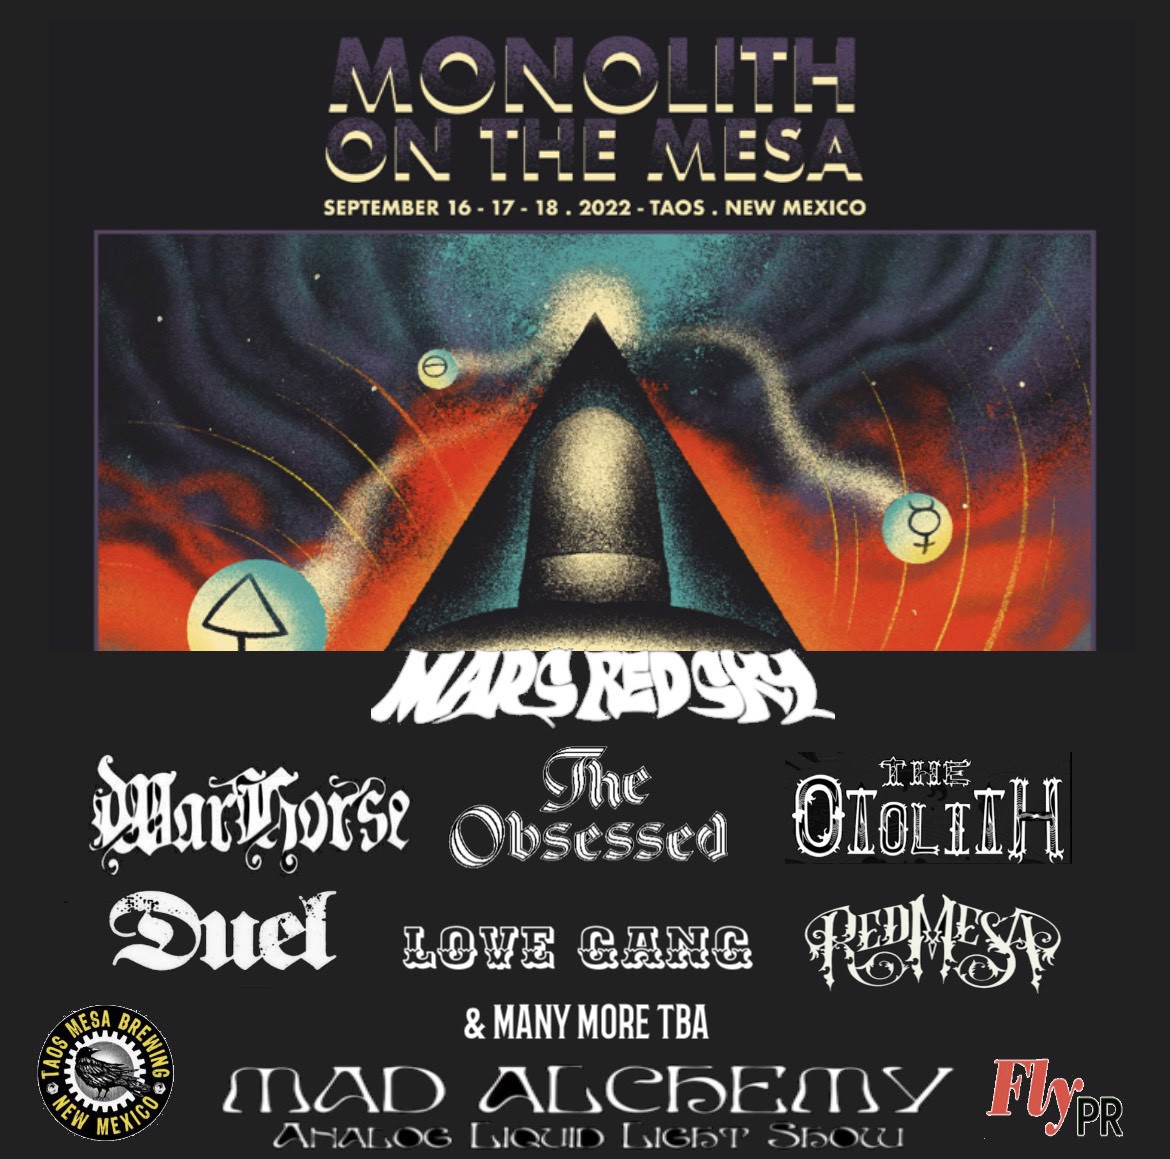 Monolith On The Mesa 2022 Books Mars Red Sky, The Obsessed, Warhorse, The  Otolith, Duel, and More - Ghost Cult MagazineGhost Cult Magazine